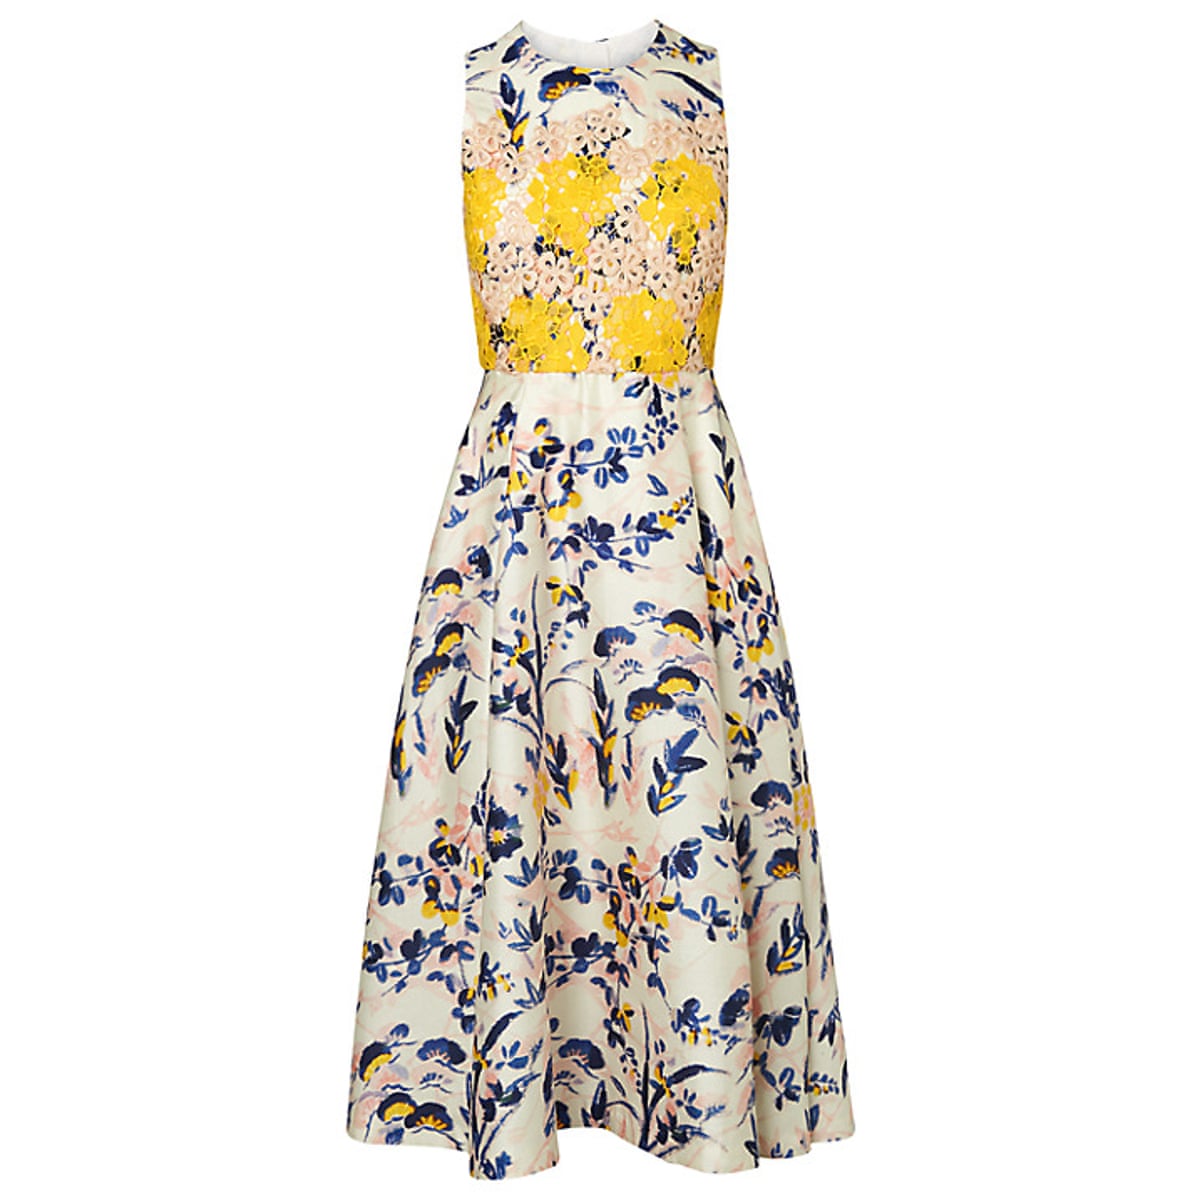 In season: 50 of the best summer dresses | Fashion | The Guardian